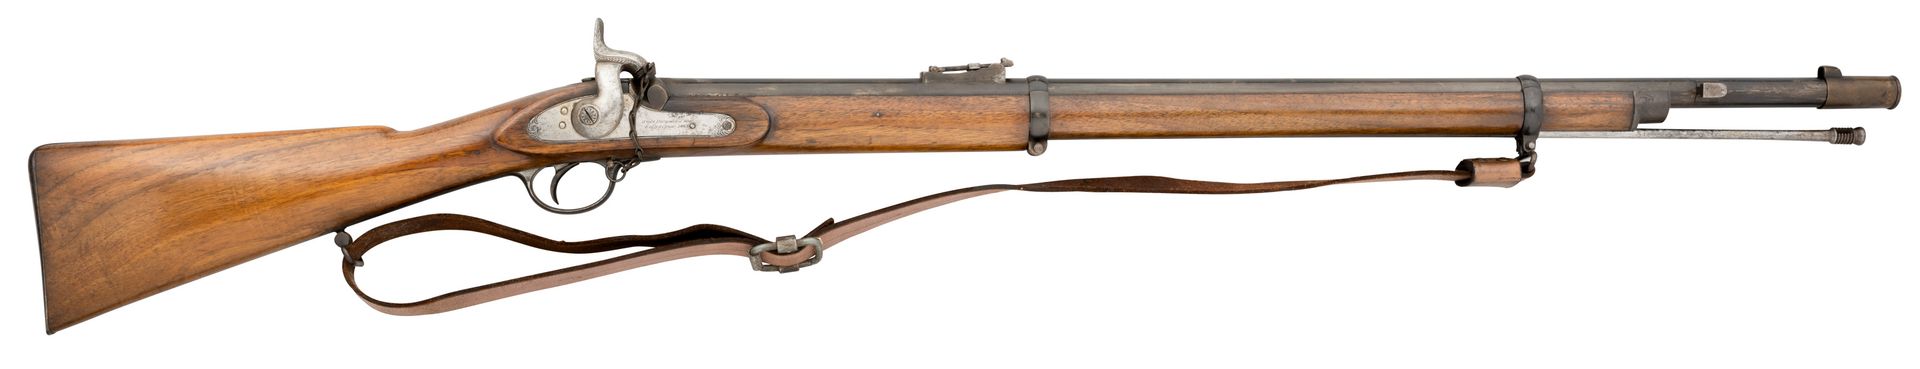 A .577 CALIBRE PERCUSSION MILITARY RIFLE BY JOHN DICKSON AND SONS A .FUCILE MILI&hellip;